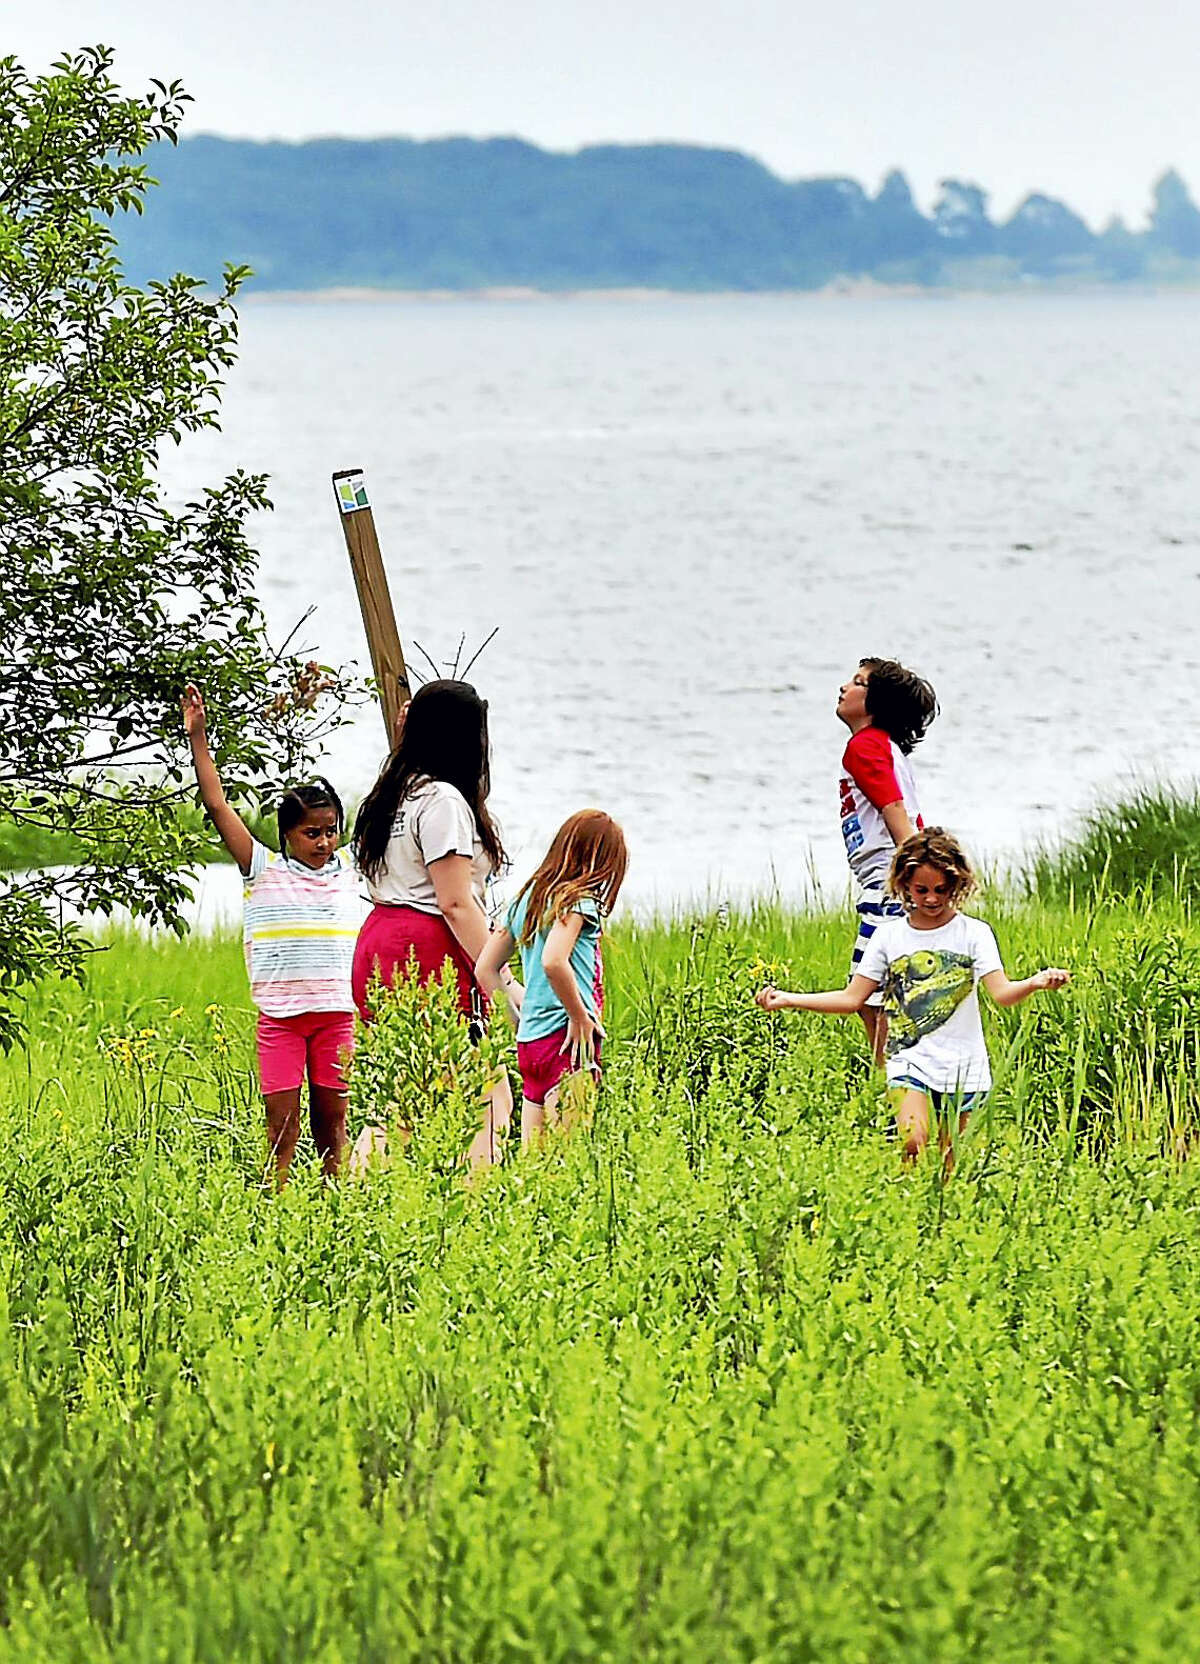 New Haven Land Trust Schooner Camp campers explore the New Haven Land Trust Long Wharf Nature Preserve Thursday at the Sound School facilities in New Haven.